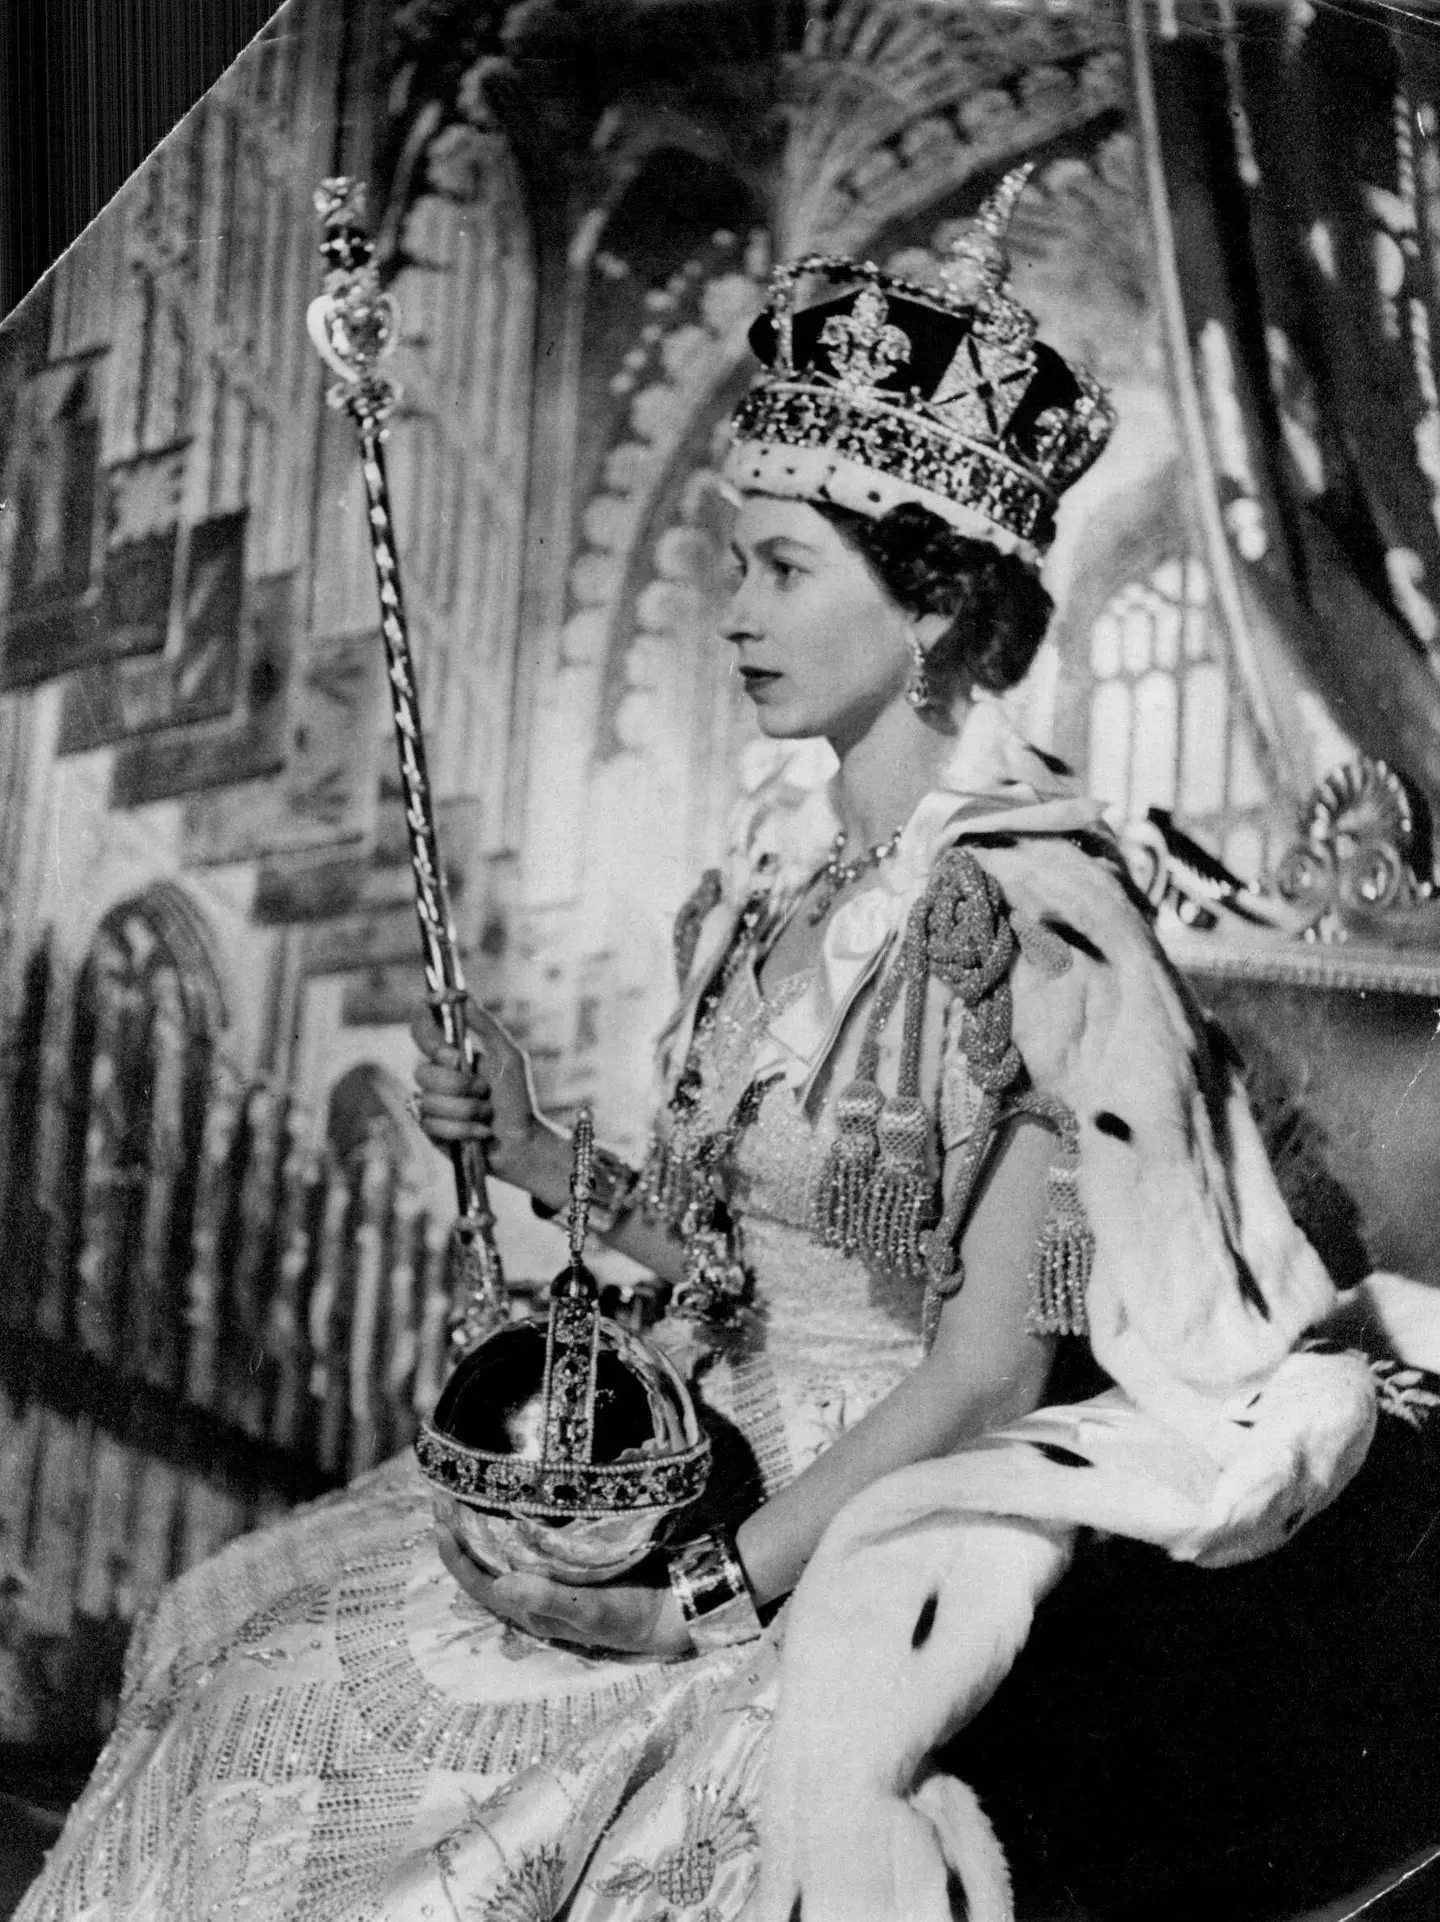 The late Queen's coronation took place on 2 June 1953.